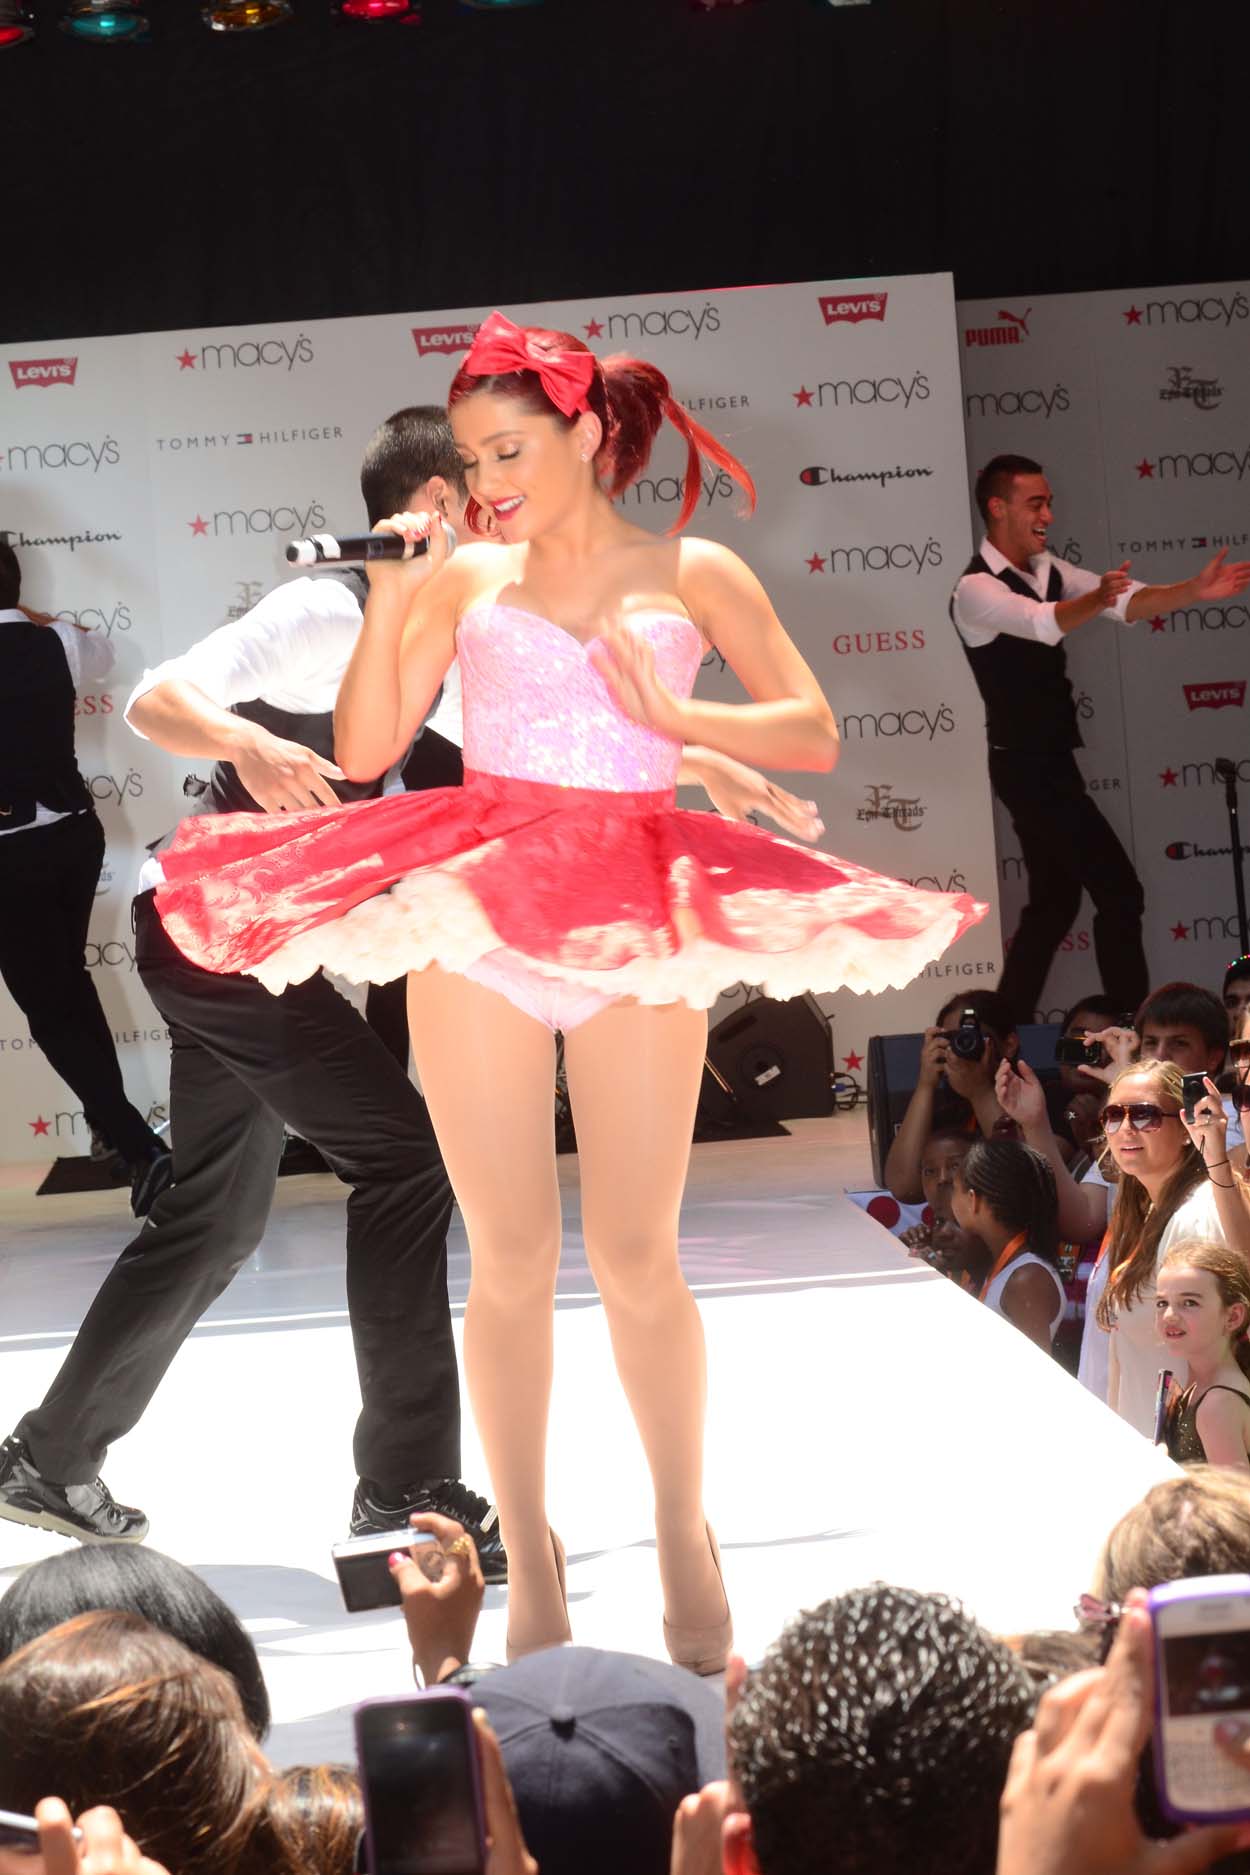 Ariana Grande performing at Macy's Annual Summer Blowout Show in NYC on July 17, 2011